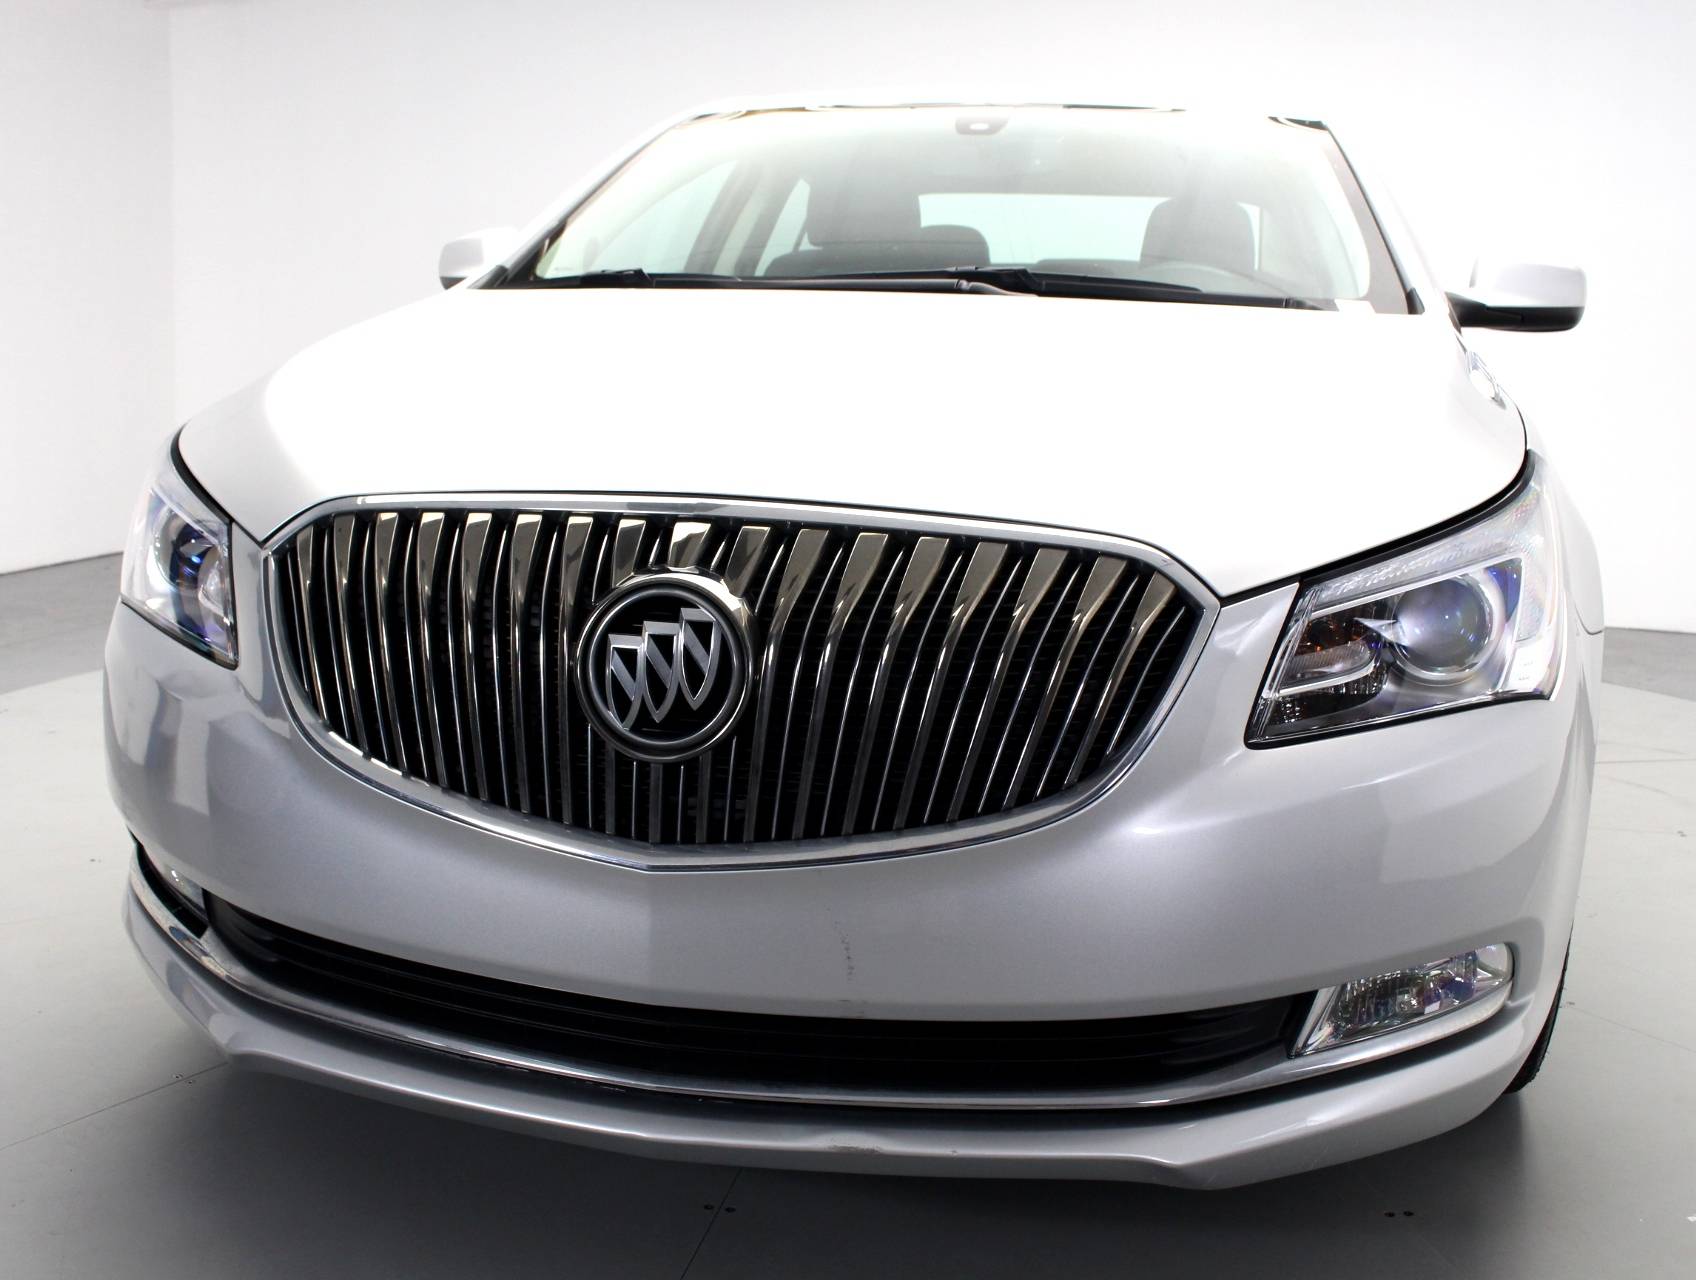 Florida Fine Cars - Used BUICK LACROSSE 2015 WEST PALM Leather Group